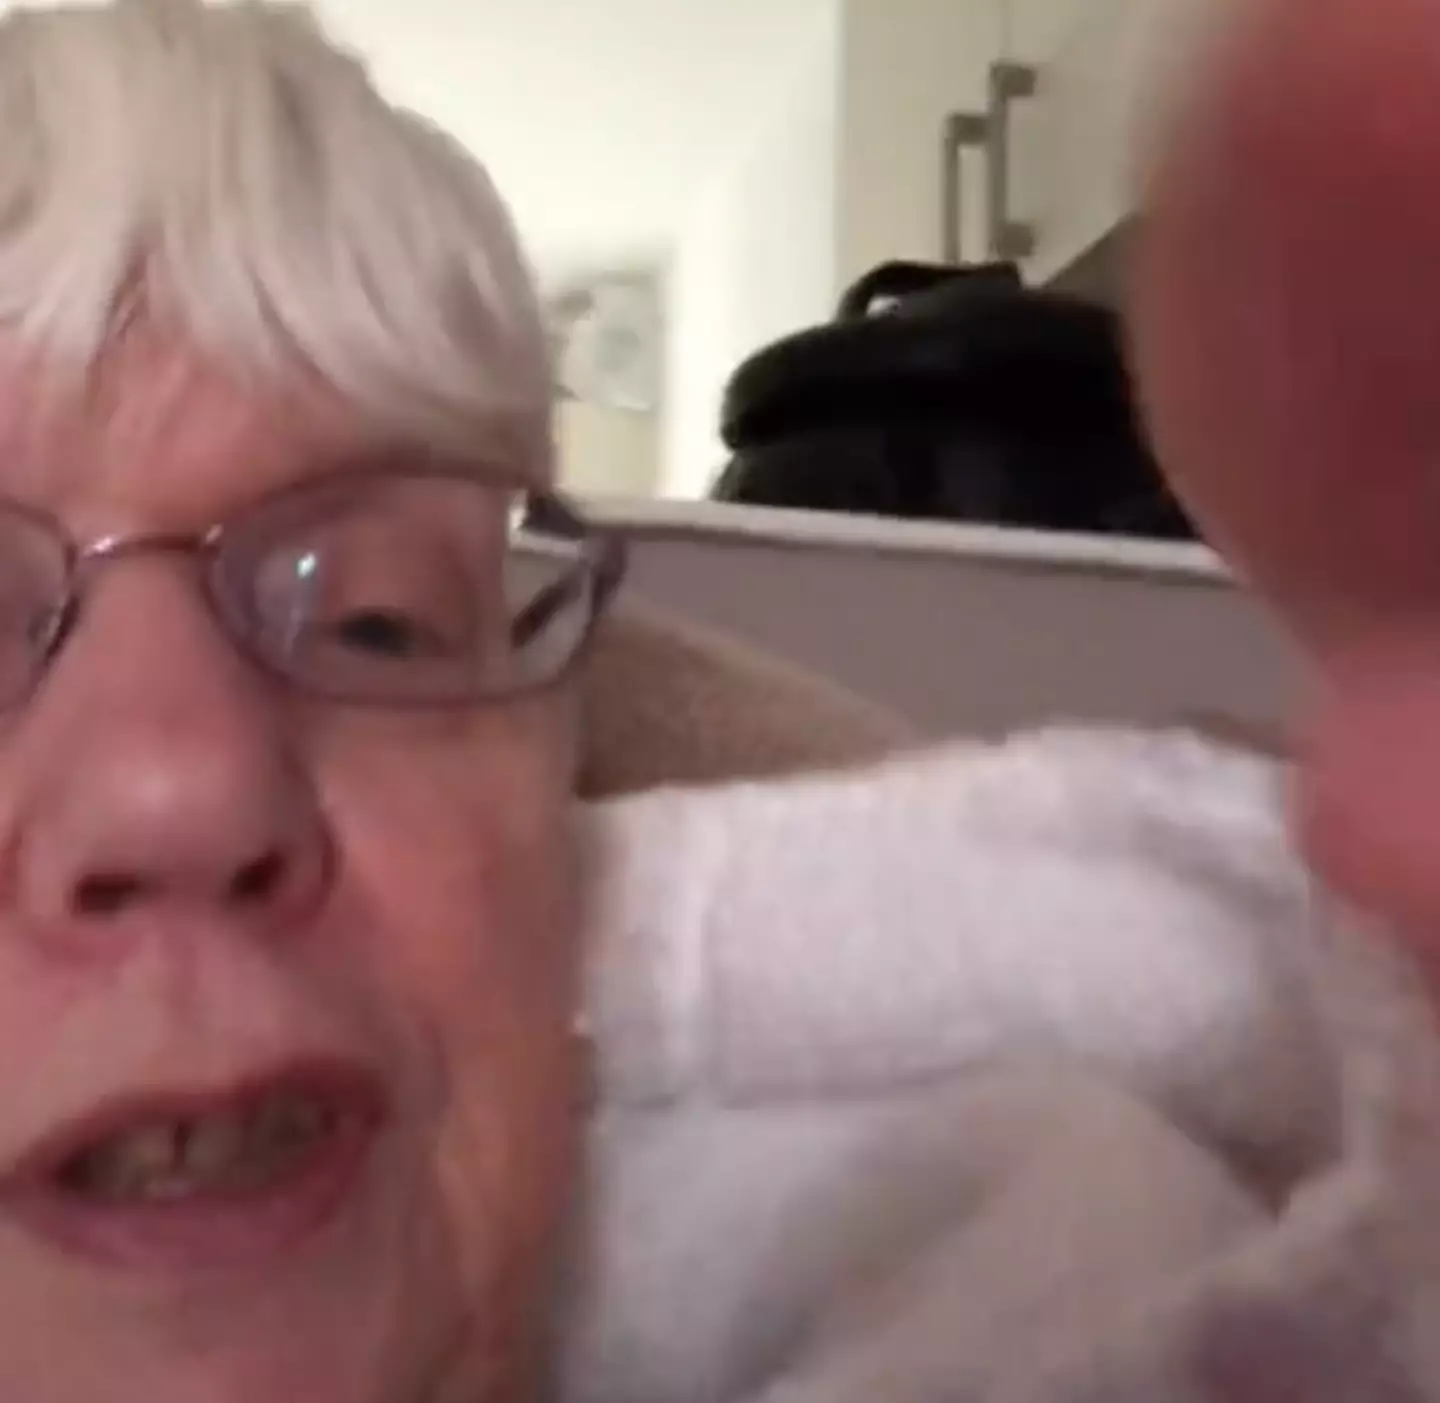 This nan accidentally started a Facebook Live.